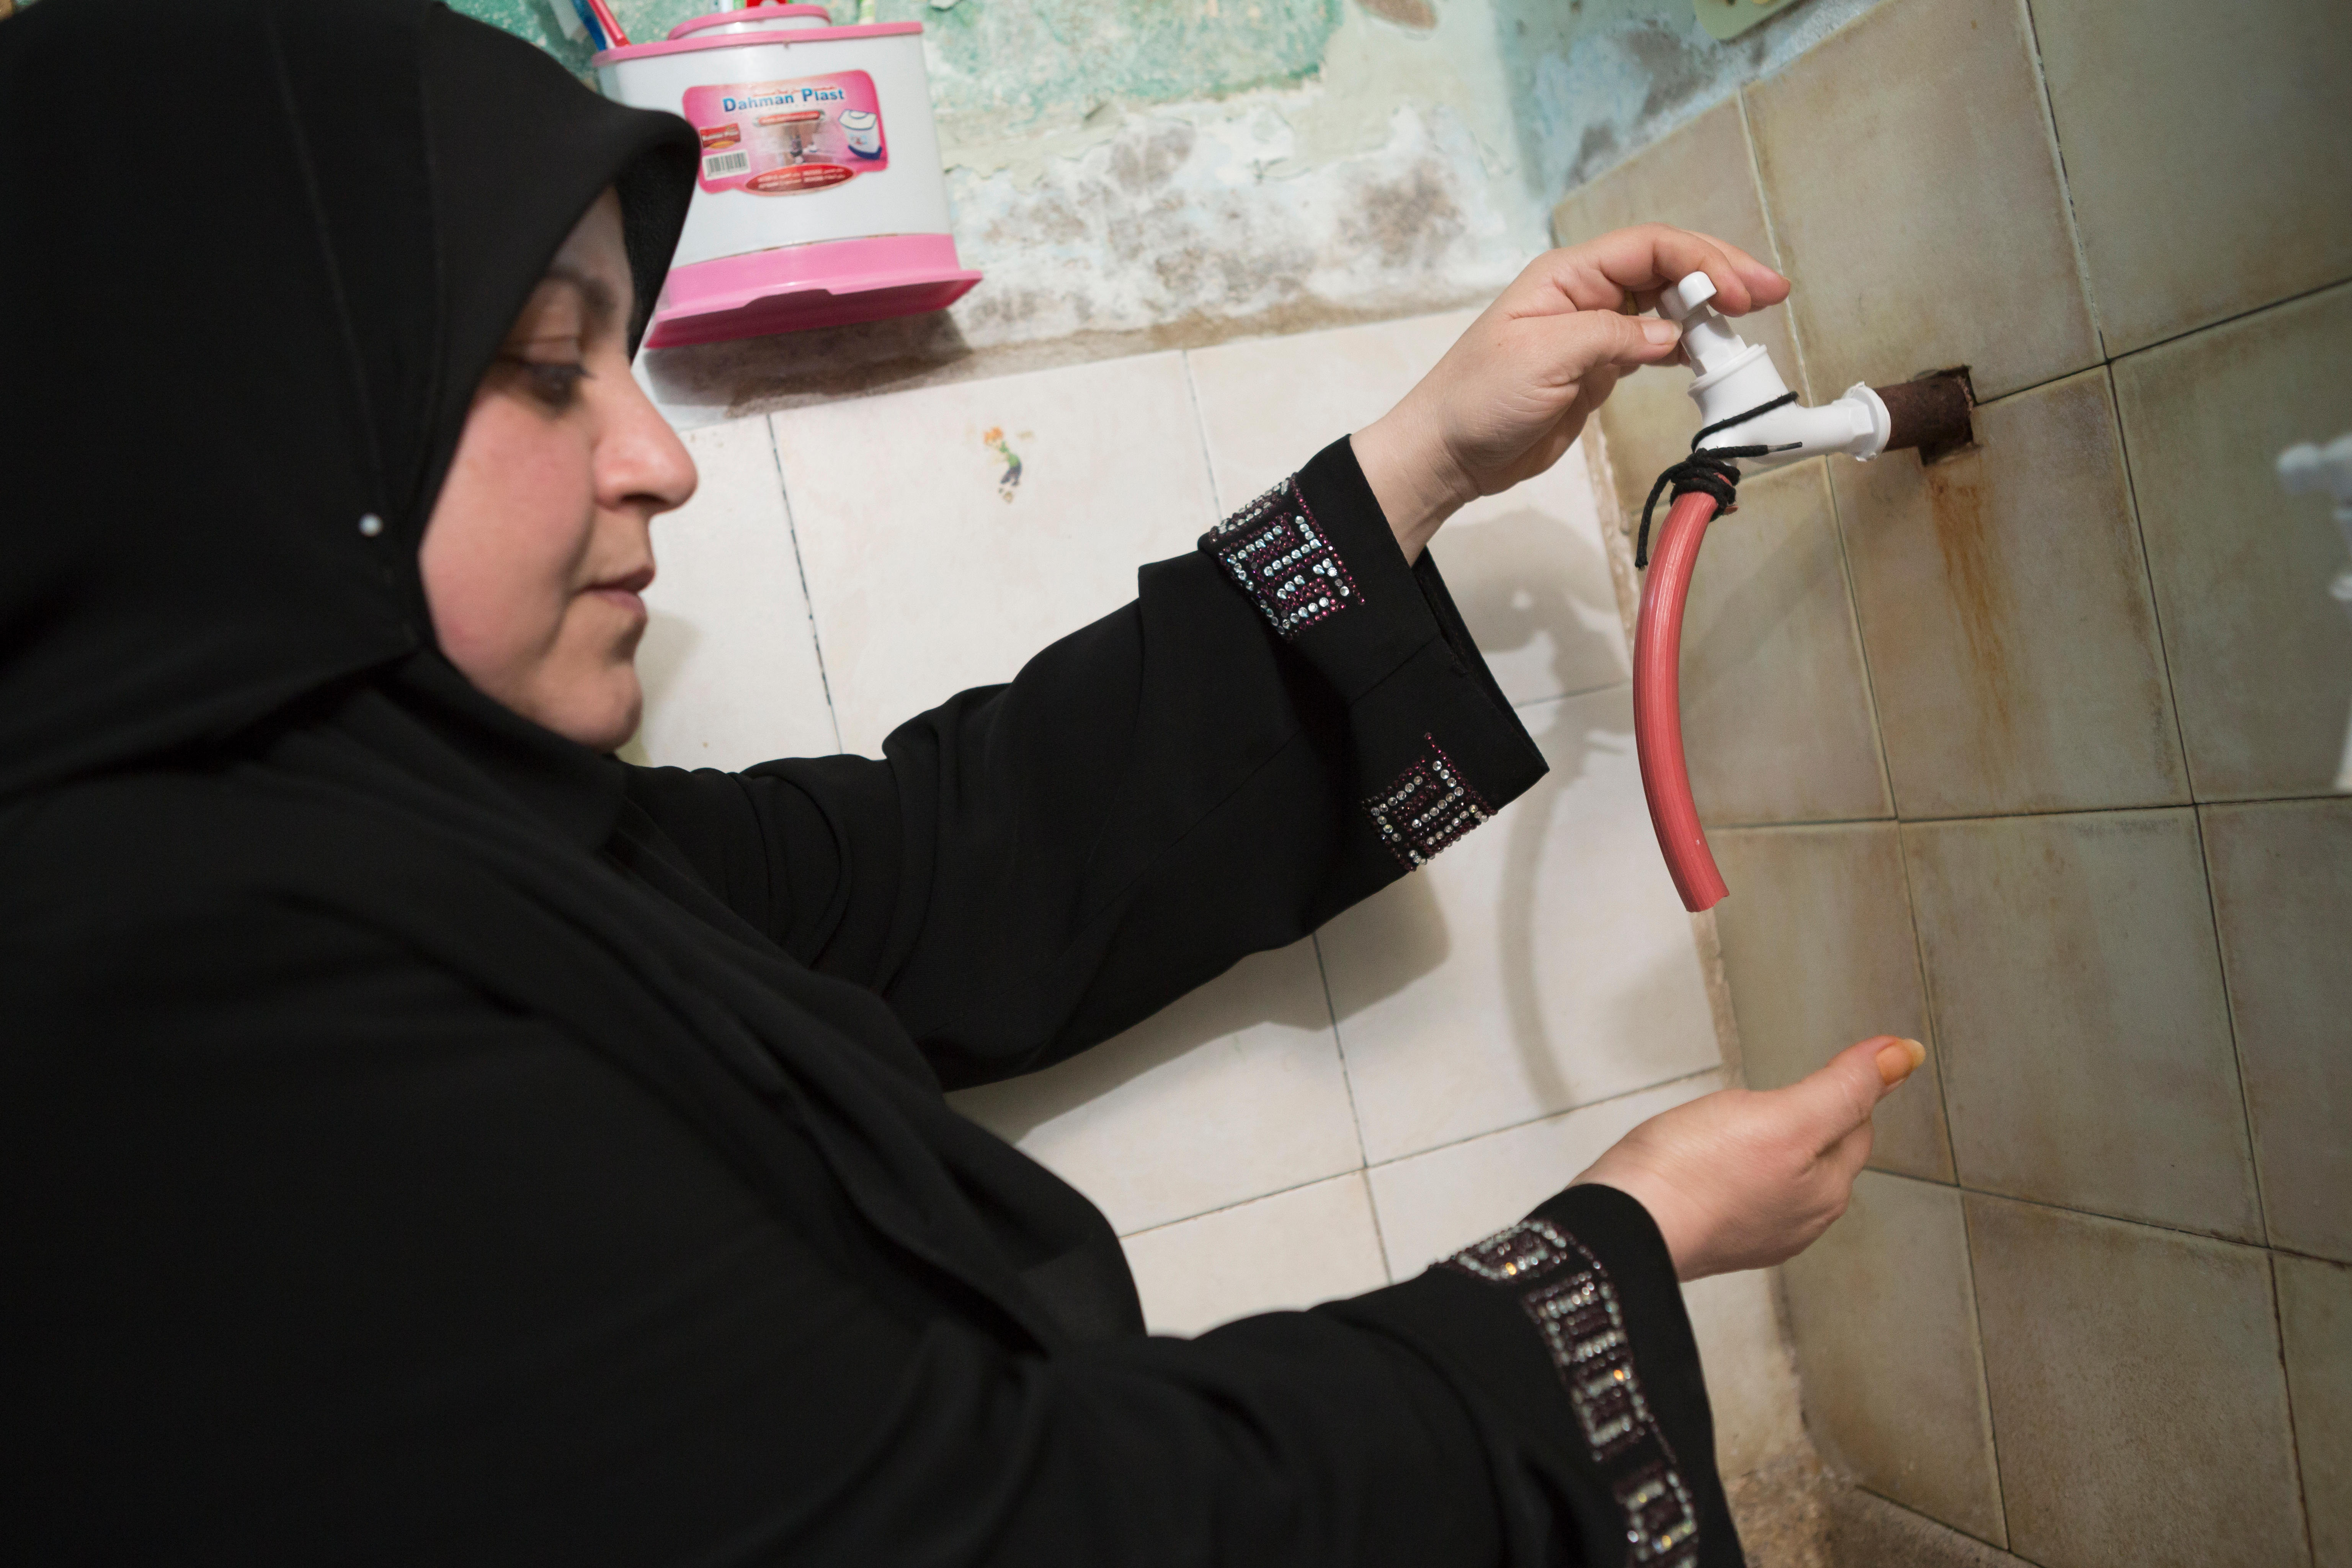 A person with head covering opens a water tap comprises of a short red hose coming out of a tiled wall.